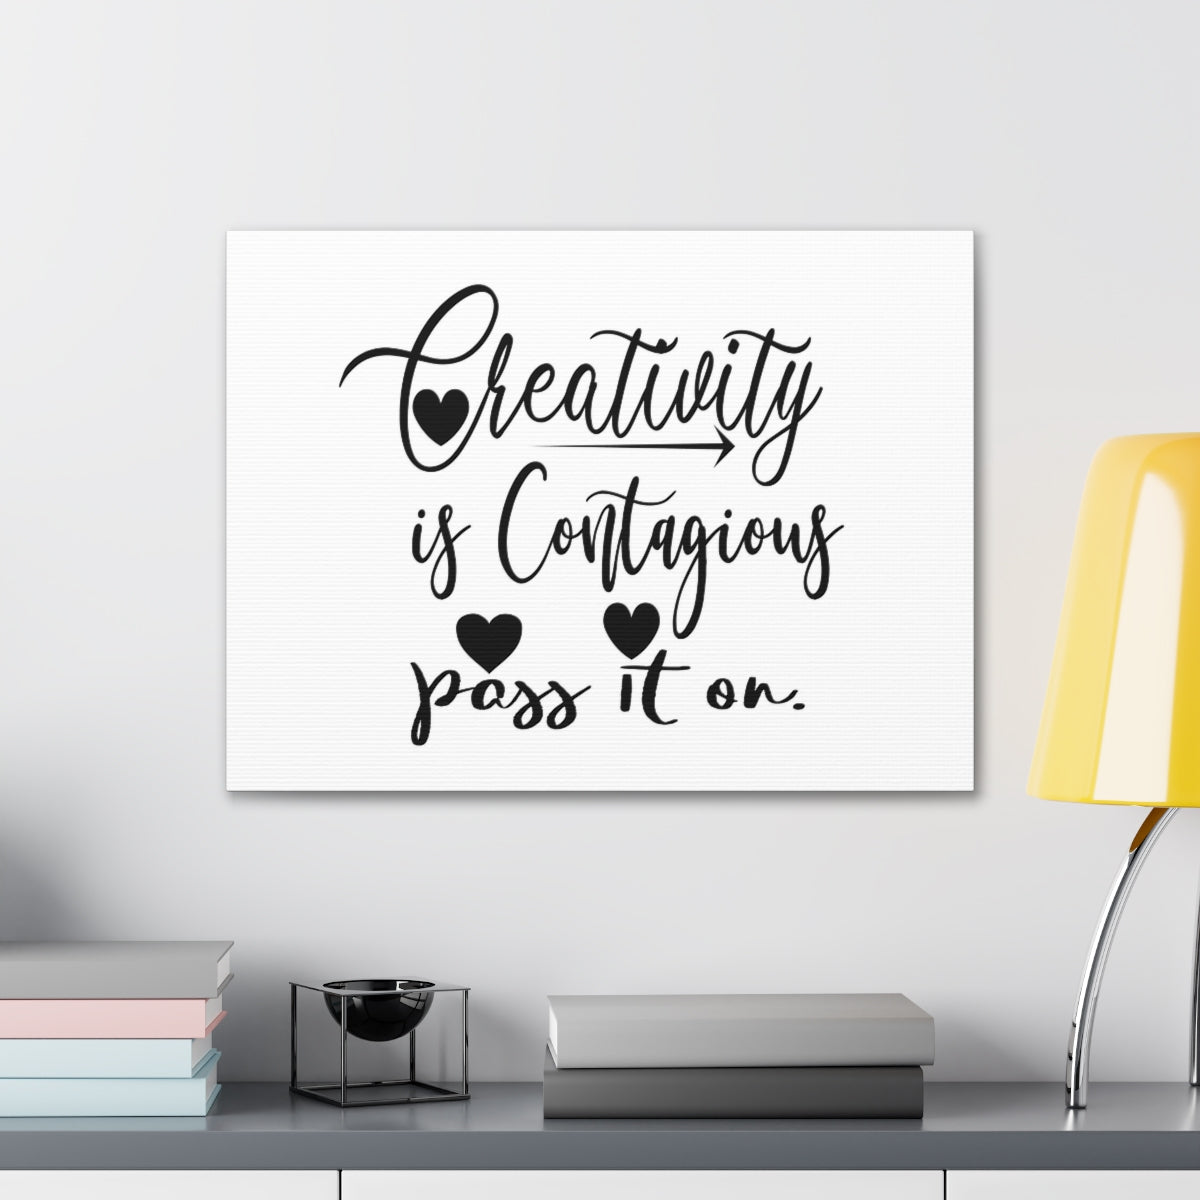 Scripture Walls Inspirational Wall Art Creativity Is Contagious Romans 12:6 Motivation Wall Decor for Home Office Gym Inspiring Success Quote Print Ready to Hang Unframed-Express Your Love Gifts